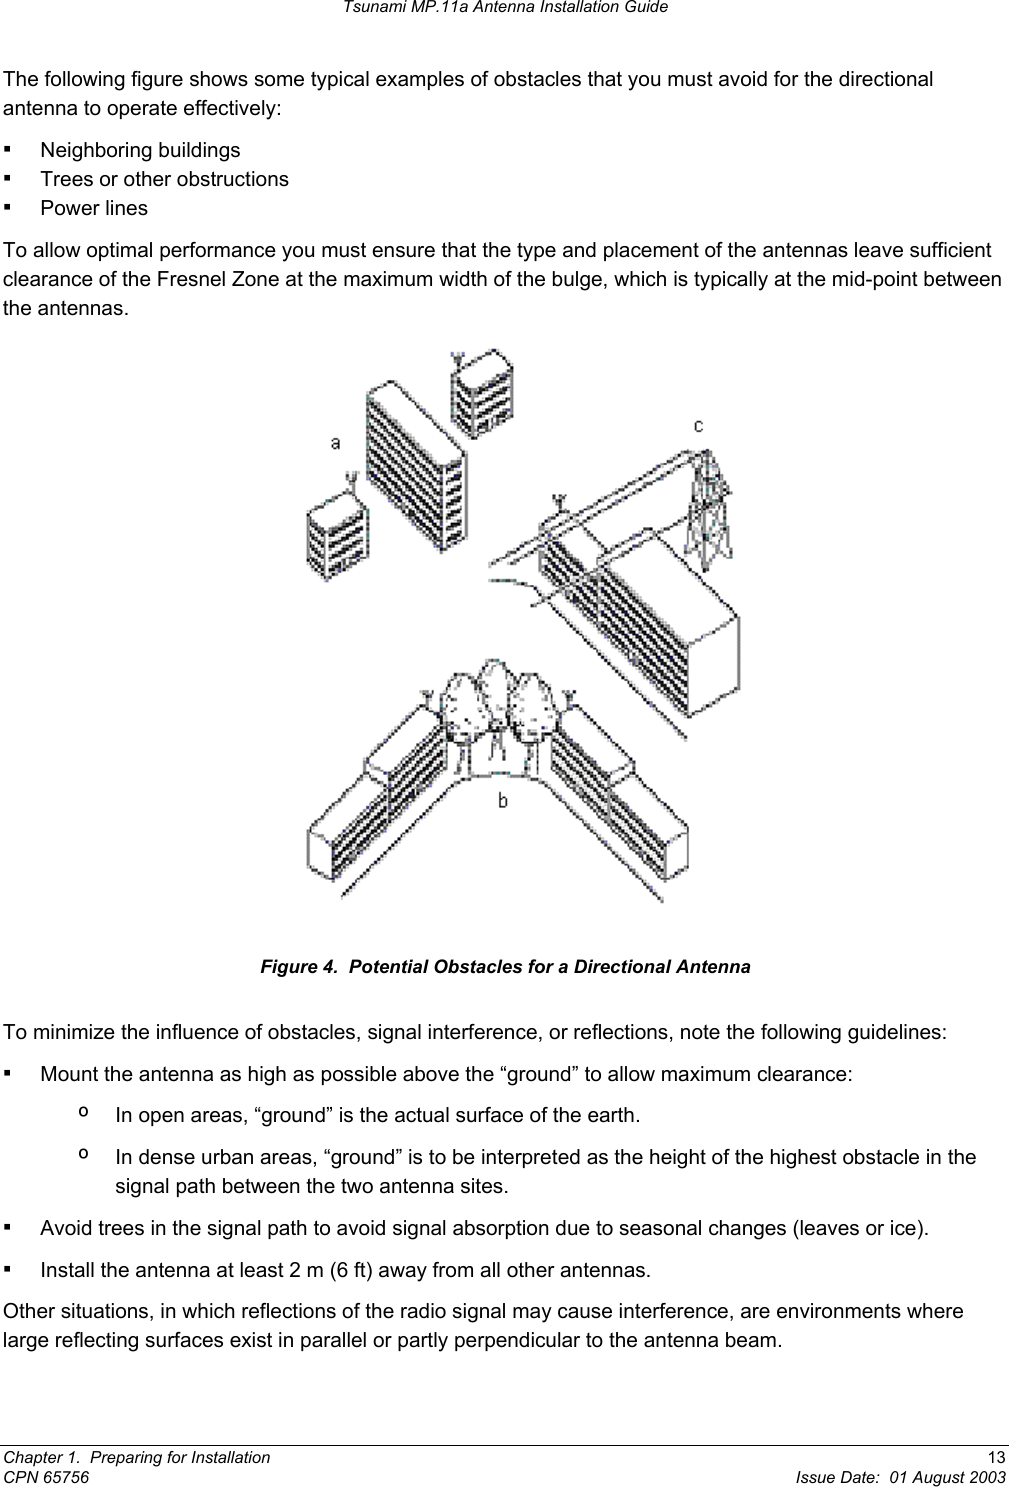 Tsunami MP.11a Antenna Installation Guide The following figure shows some typical examples of obstacles that you must avoid for the directional antenna to operate effectively: ▪ Neighboring buildings ▪ Trees or other obstructions ▪ Power lines To allow optimal performance you must ensure that the type and placement of the antennas leave sufficient clearance of the Fresnel Zone at the maximum width of the bulge, which is typically at the mid-point between the antennas.  Figure 4.  Potential Obstacles for a Directional Antenna To minimize the influence of obstacles, signal interference, or reflections, note the following guidelines: ▪ Mount the antenna as high as possible above the “ground” to allow maximum clearance: º  In open areas, “ground” is the actual surface of the earth. º  In dense urban areas, “ground” is to be interpreted as the height of the highest obstacle in the signal path between the two antenna sites. ▪ Avoid trees in the signal path to avoid signal absorption due to seasonal changes (leaves or ice). ▪ Install the antenna at least 2 m (6 ft) away from all other antennas. Other situations, in which reflections of the radio signal may cause interference, are environments where large reflecting surfaces exist in parallel or partly perpendicular to the antenna beam. Chapter 1.  Preparing for Installation  13 CPN 65756  Issue Date:  01 August 2003 